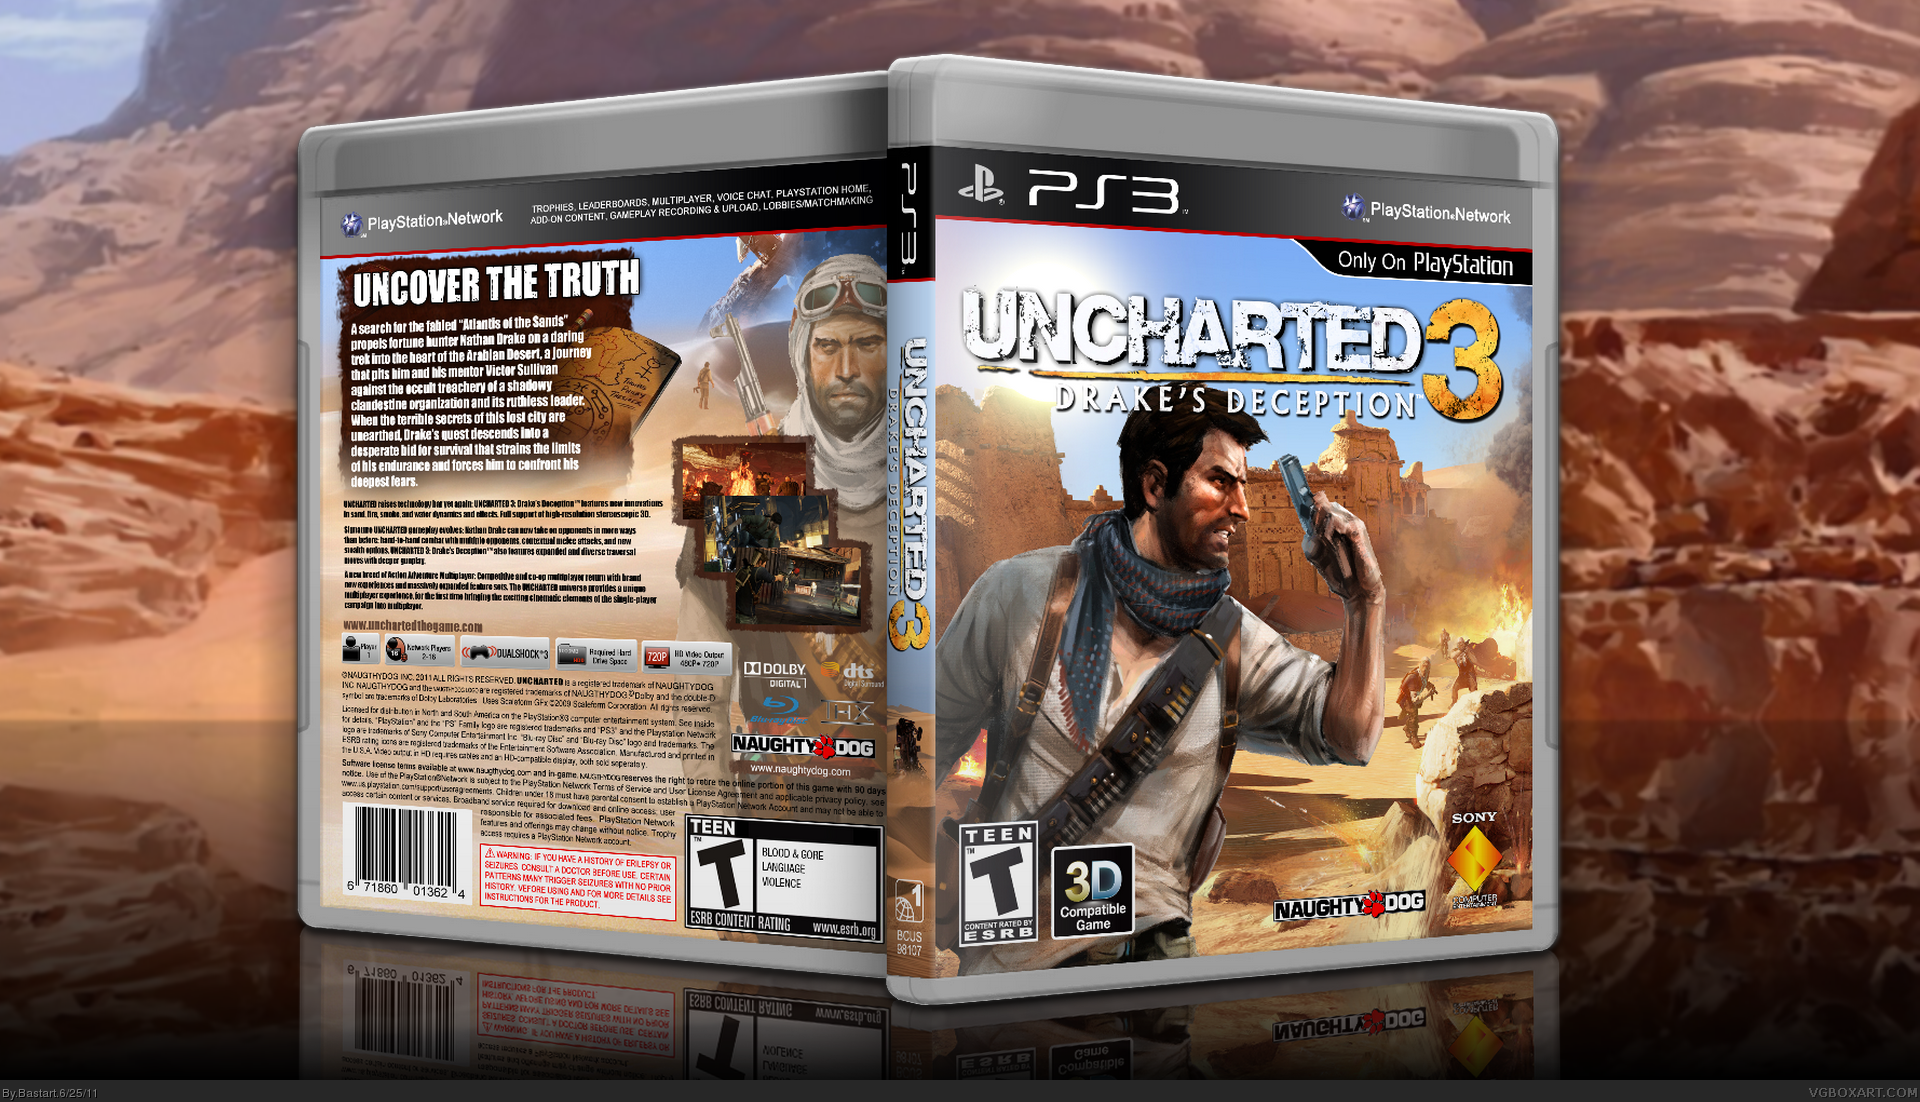 Uncharted 3 Pc Crack Game